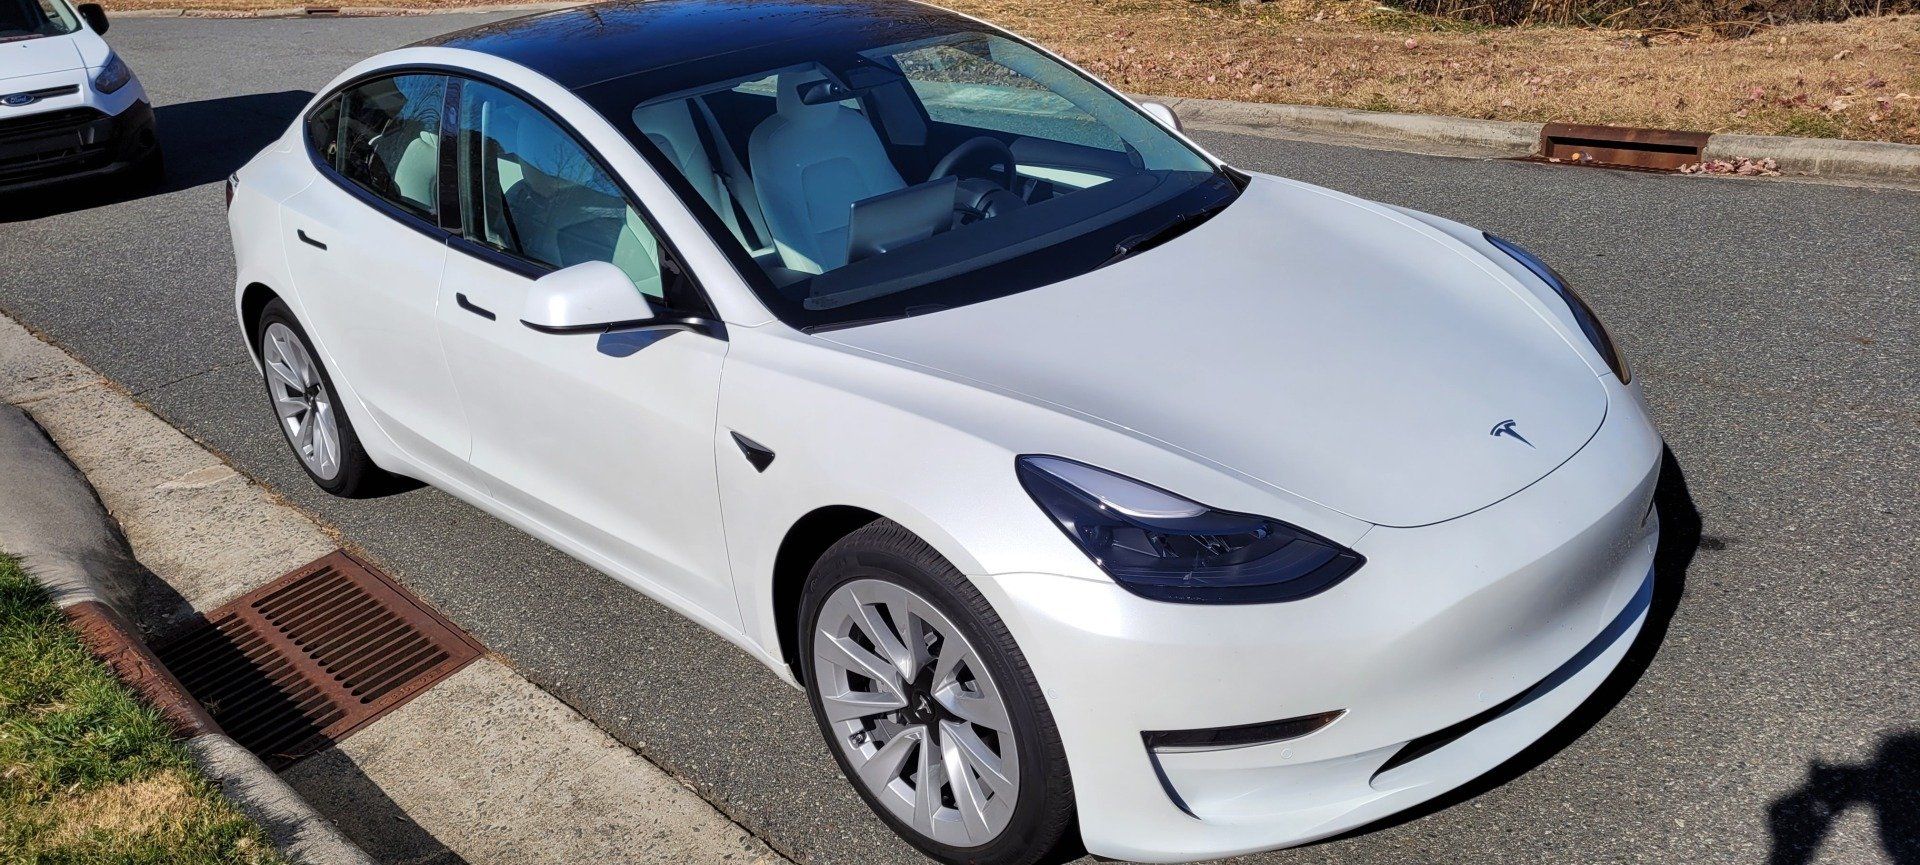 Tesla Windshield Replacement in Charlotte, NC